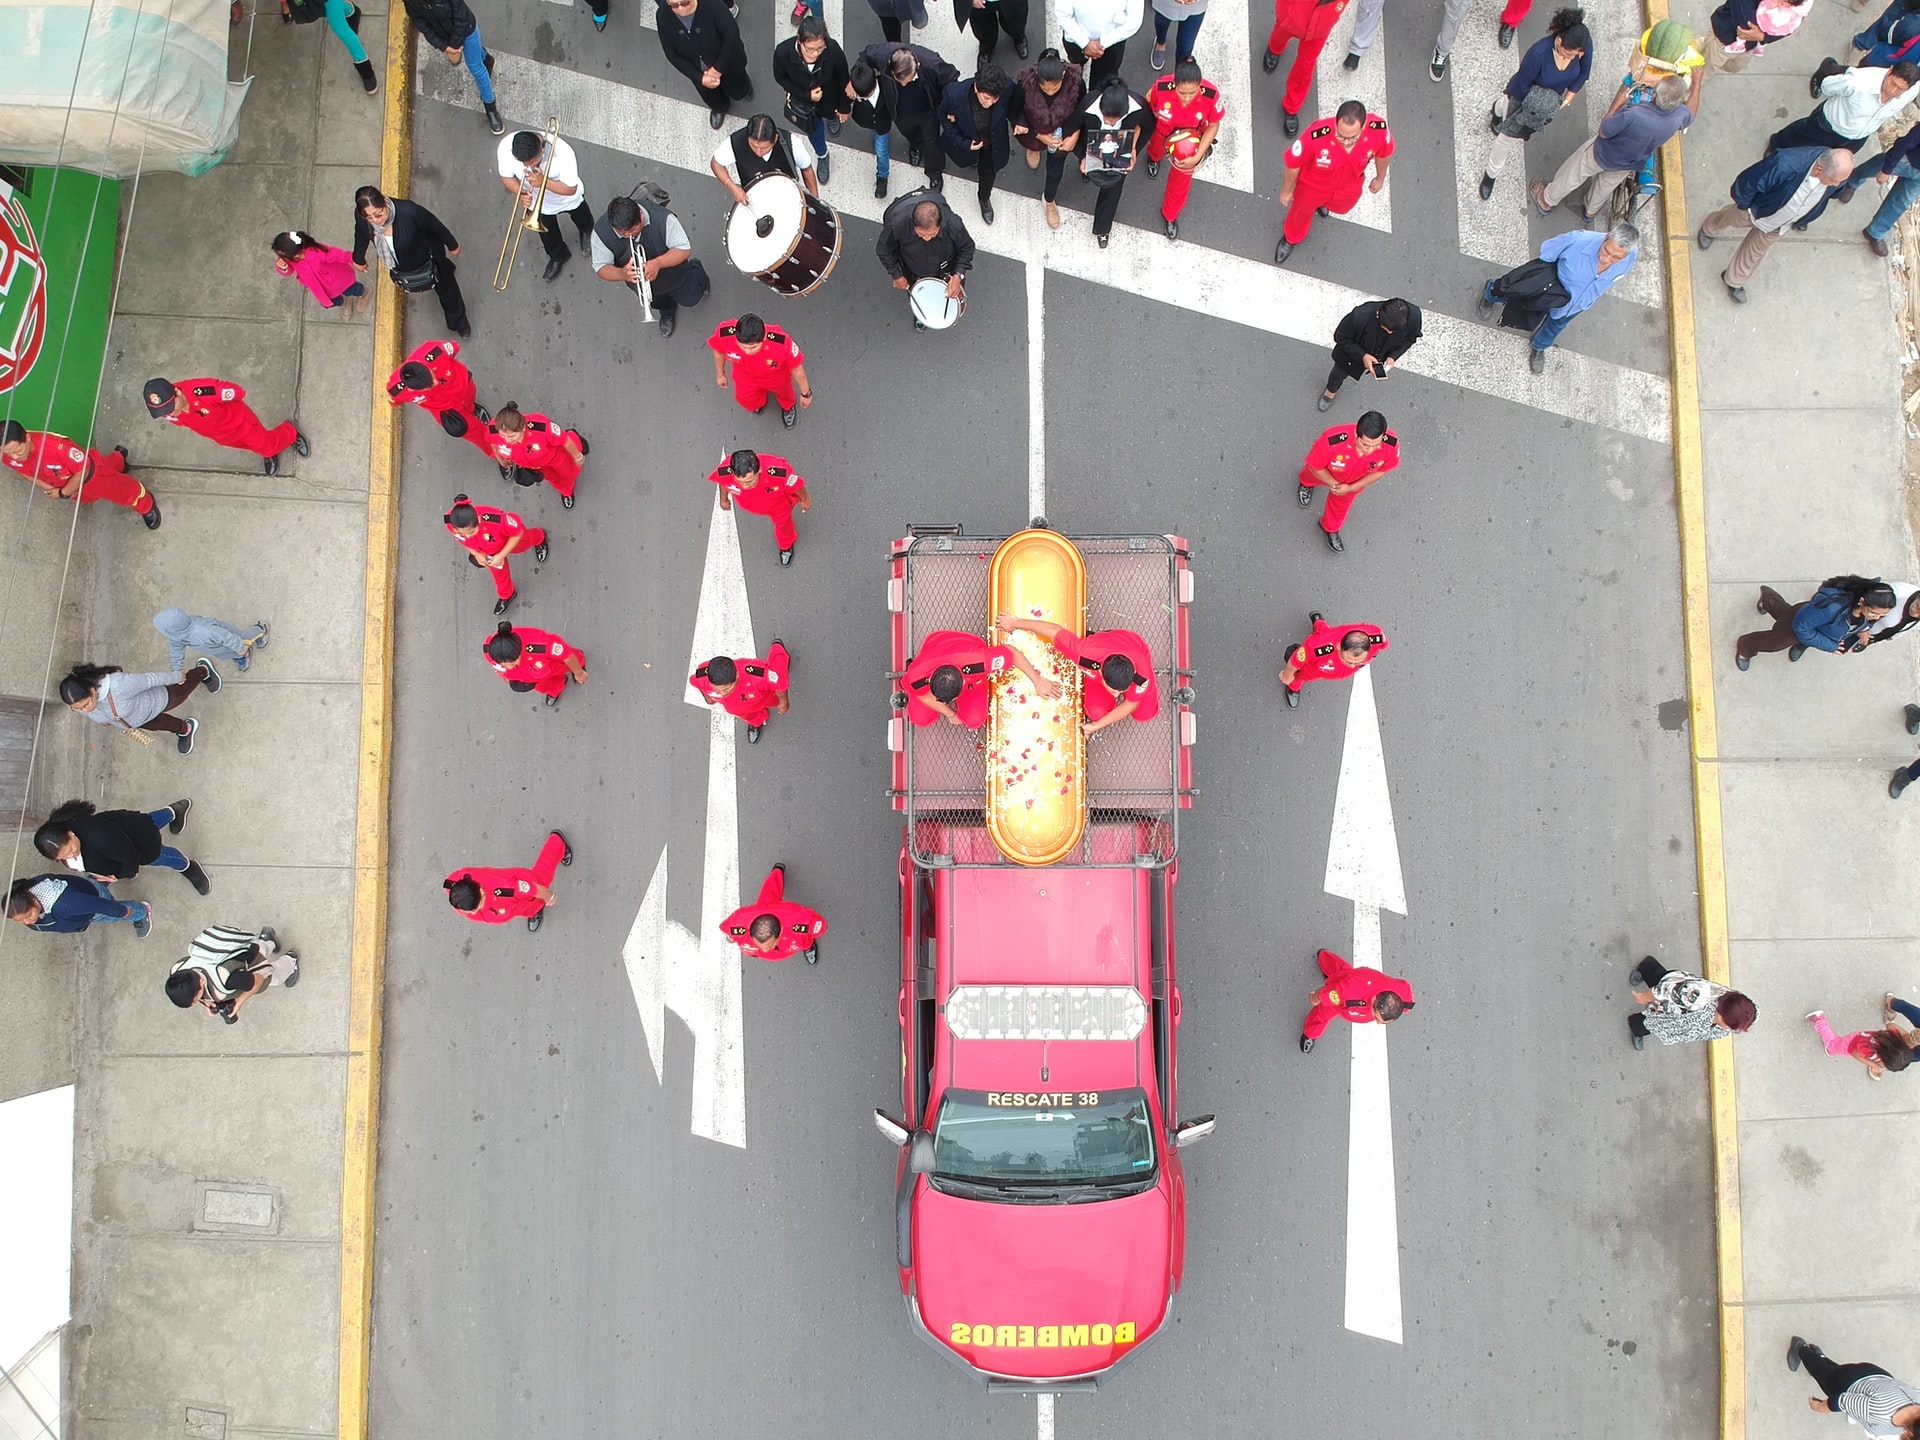 A funeral procession in a street, looking down on a car and people dressed in red.